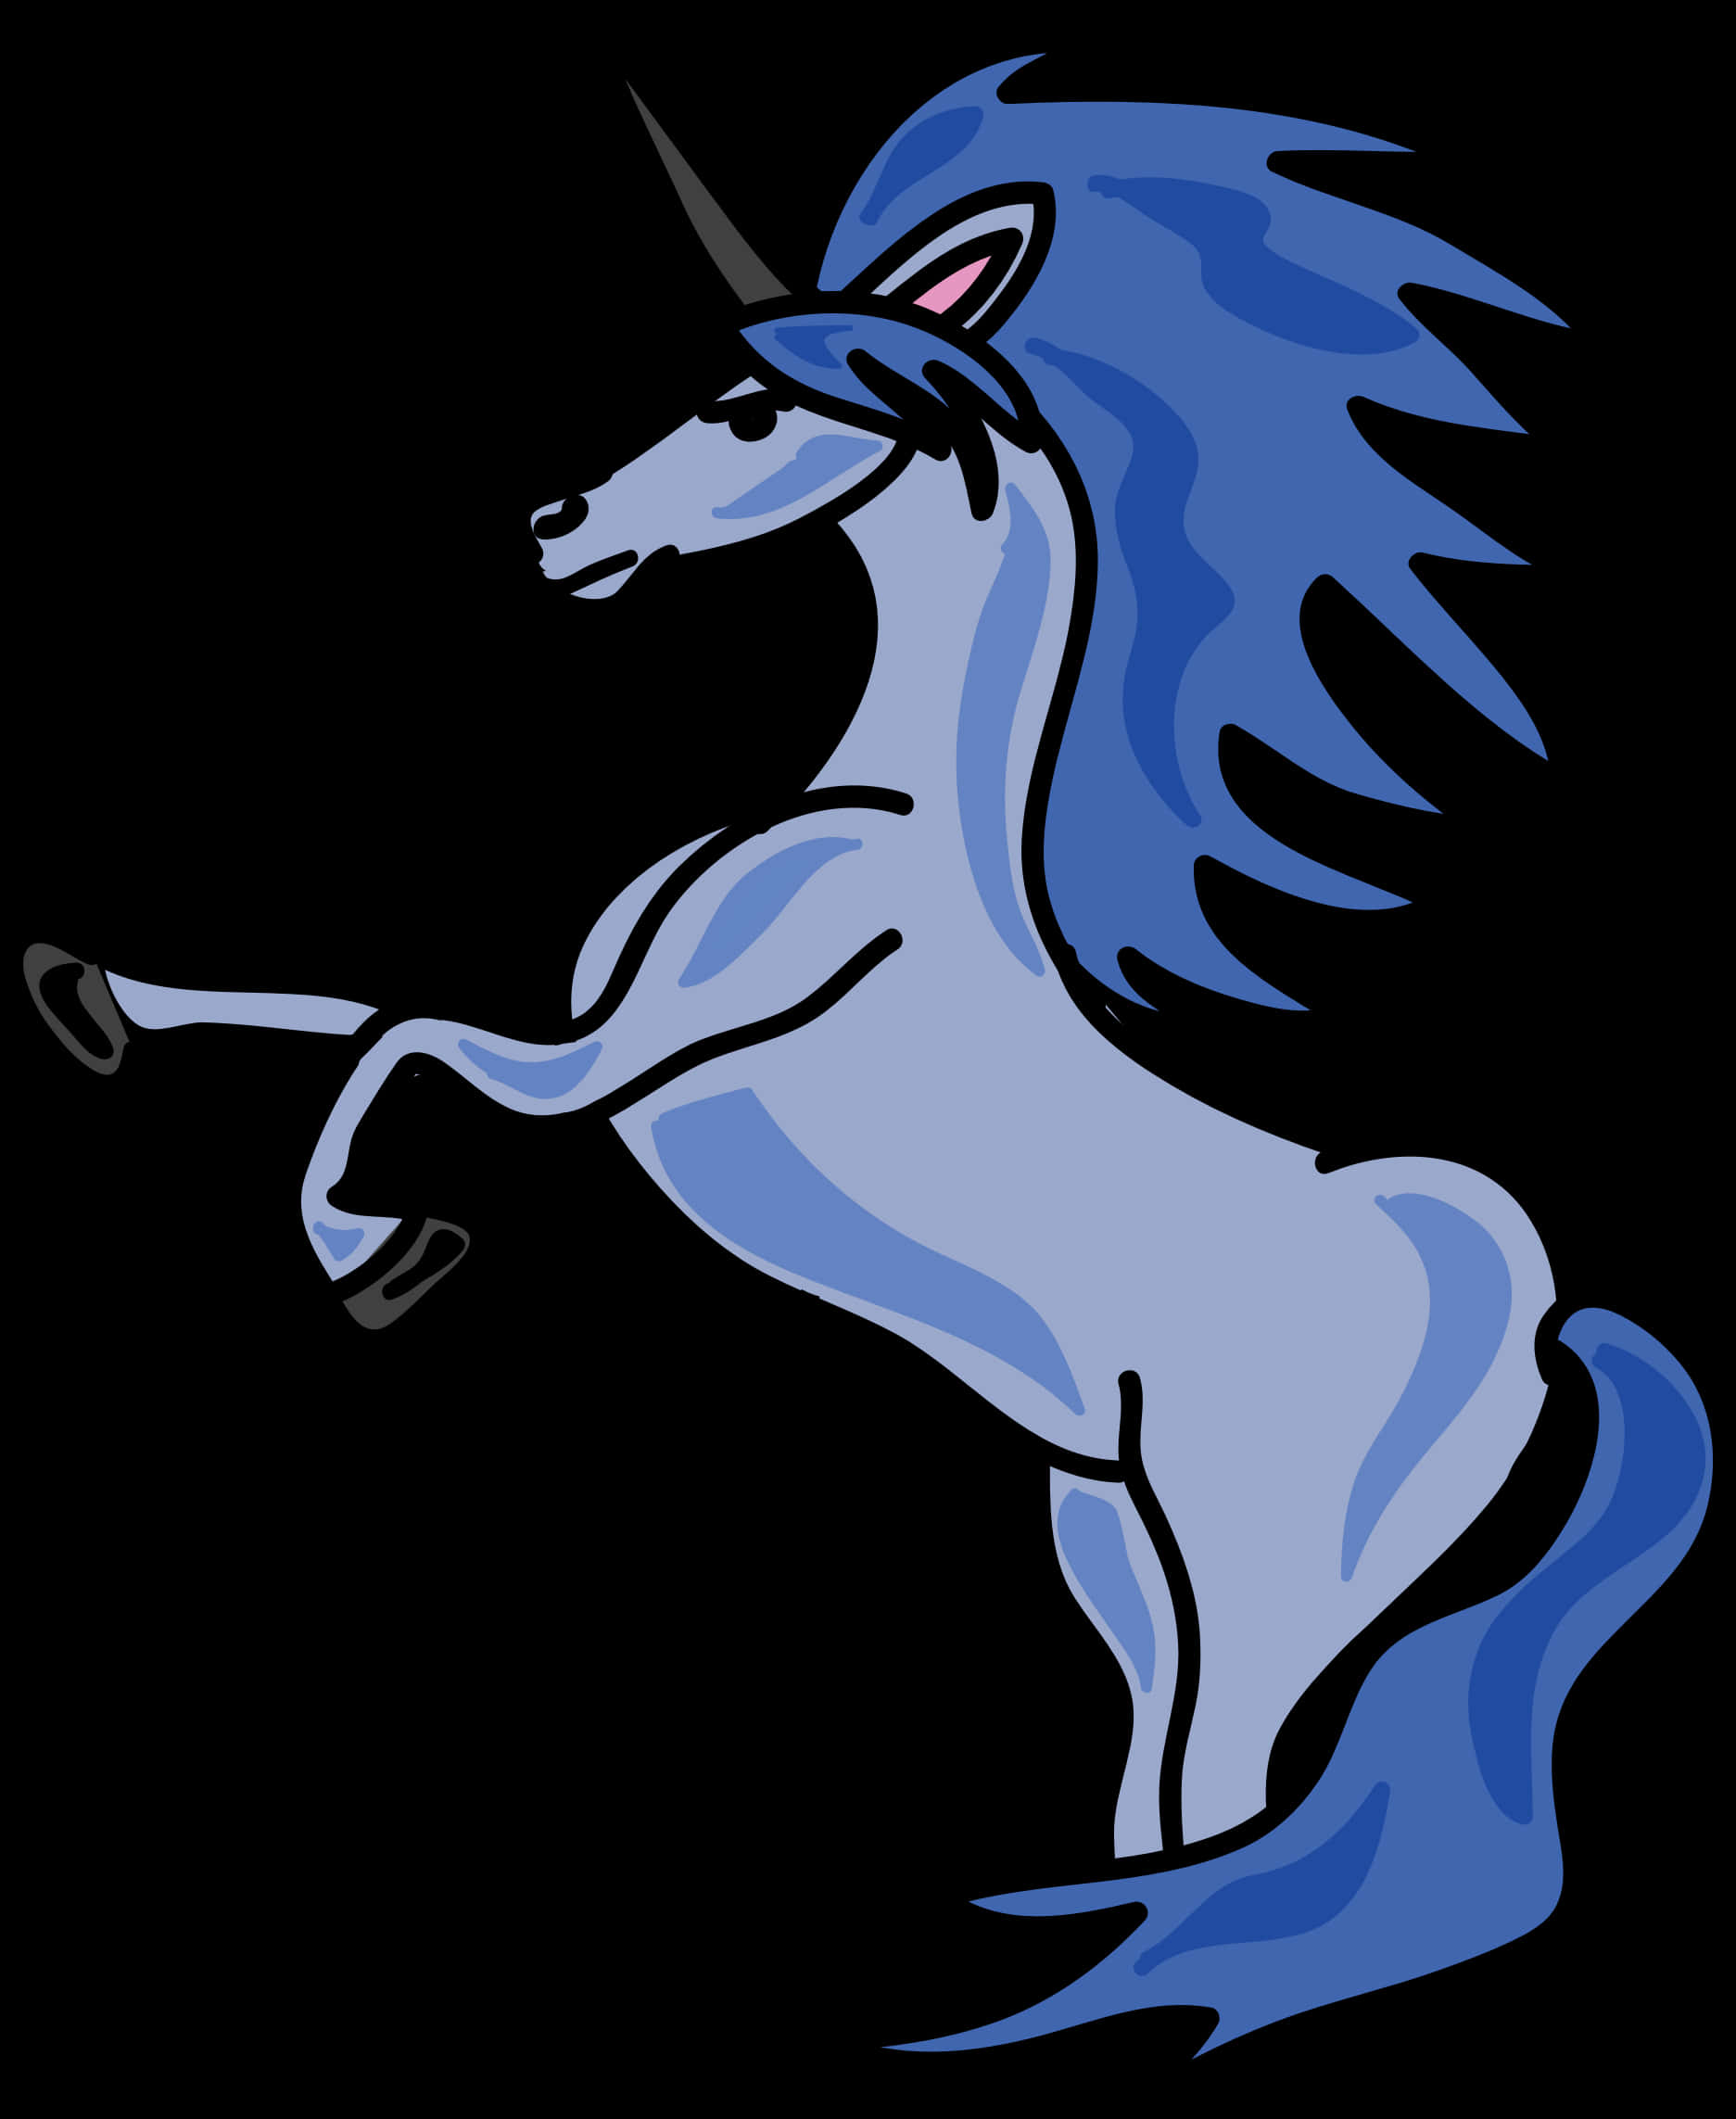 A Blue Unicorn With A Horn On Its Tail